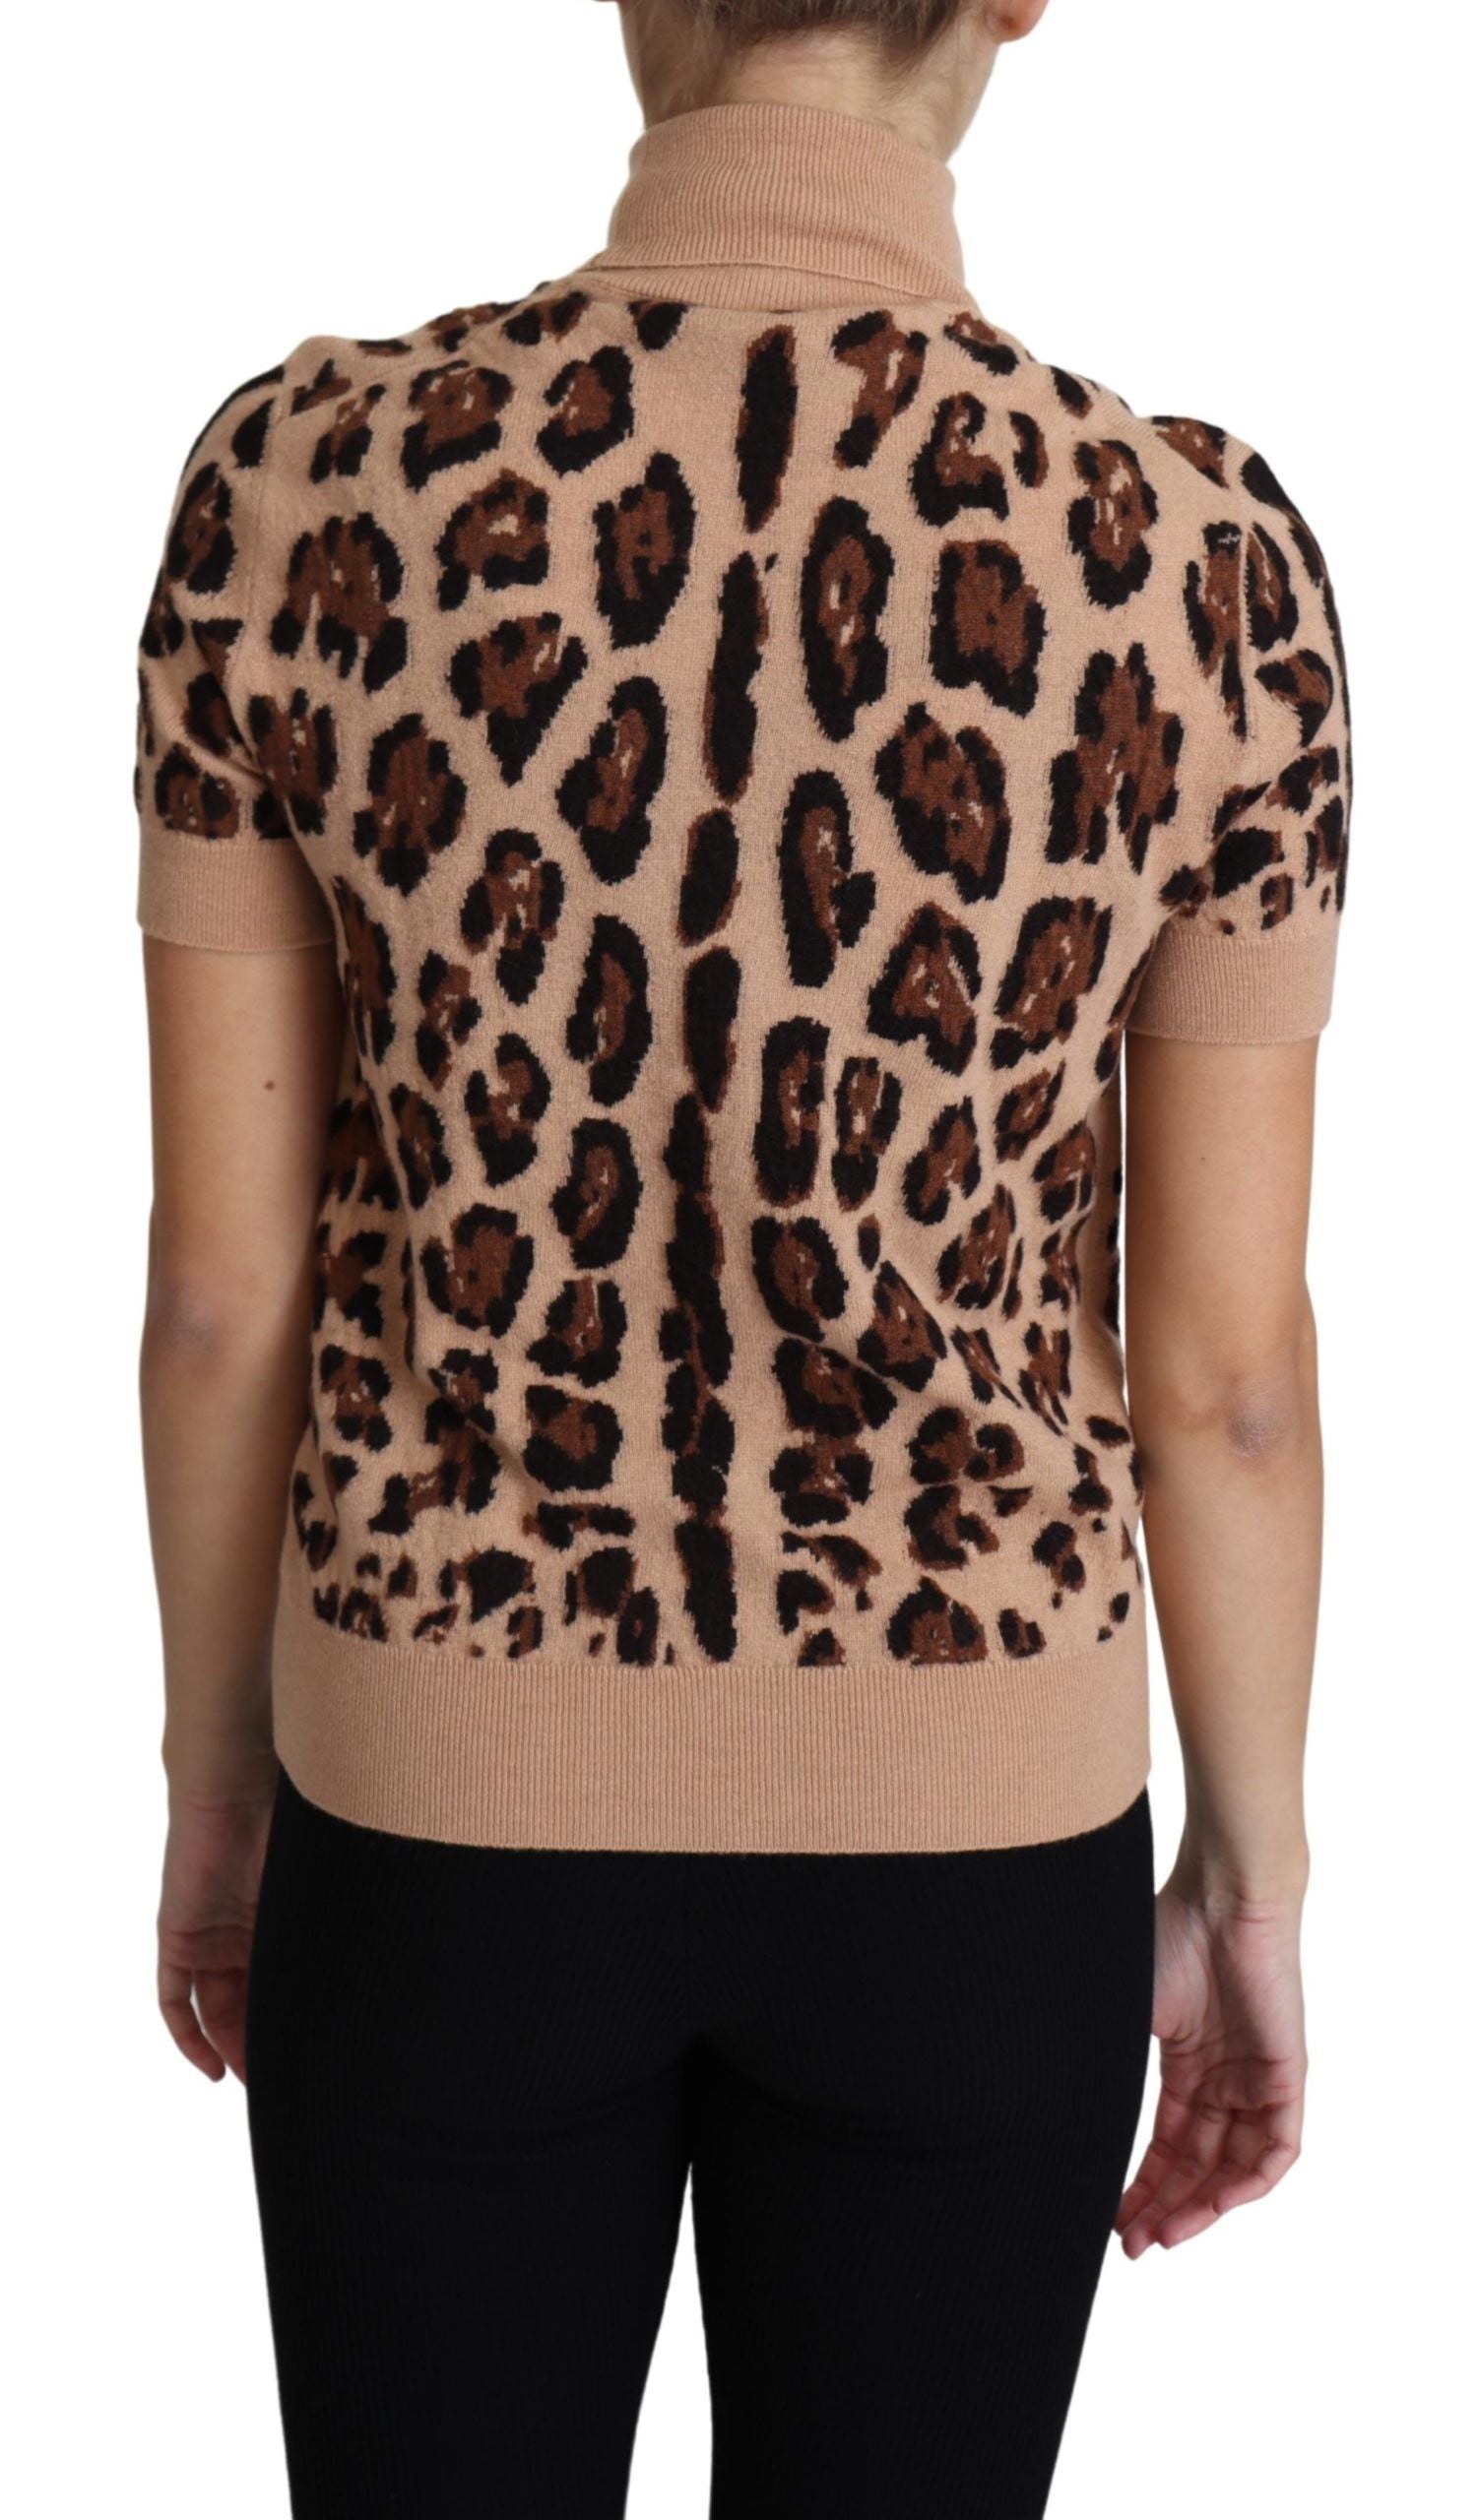 Beige Leopard Print Virgin Wool Turtleneck Top - Designed by Dolce & Gabbana Available to Buy at a Discounted Price on Moon Behind The Hill Online Designer Discount Store